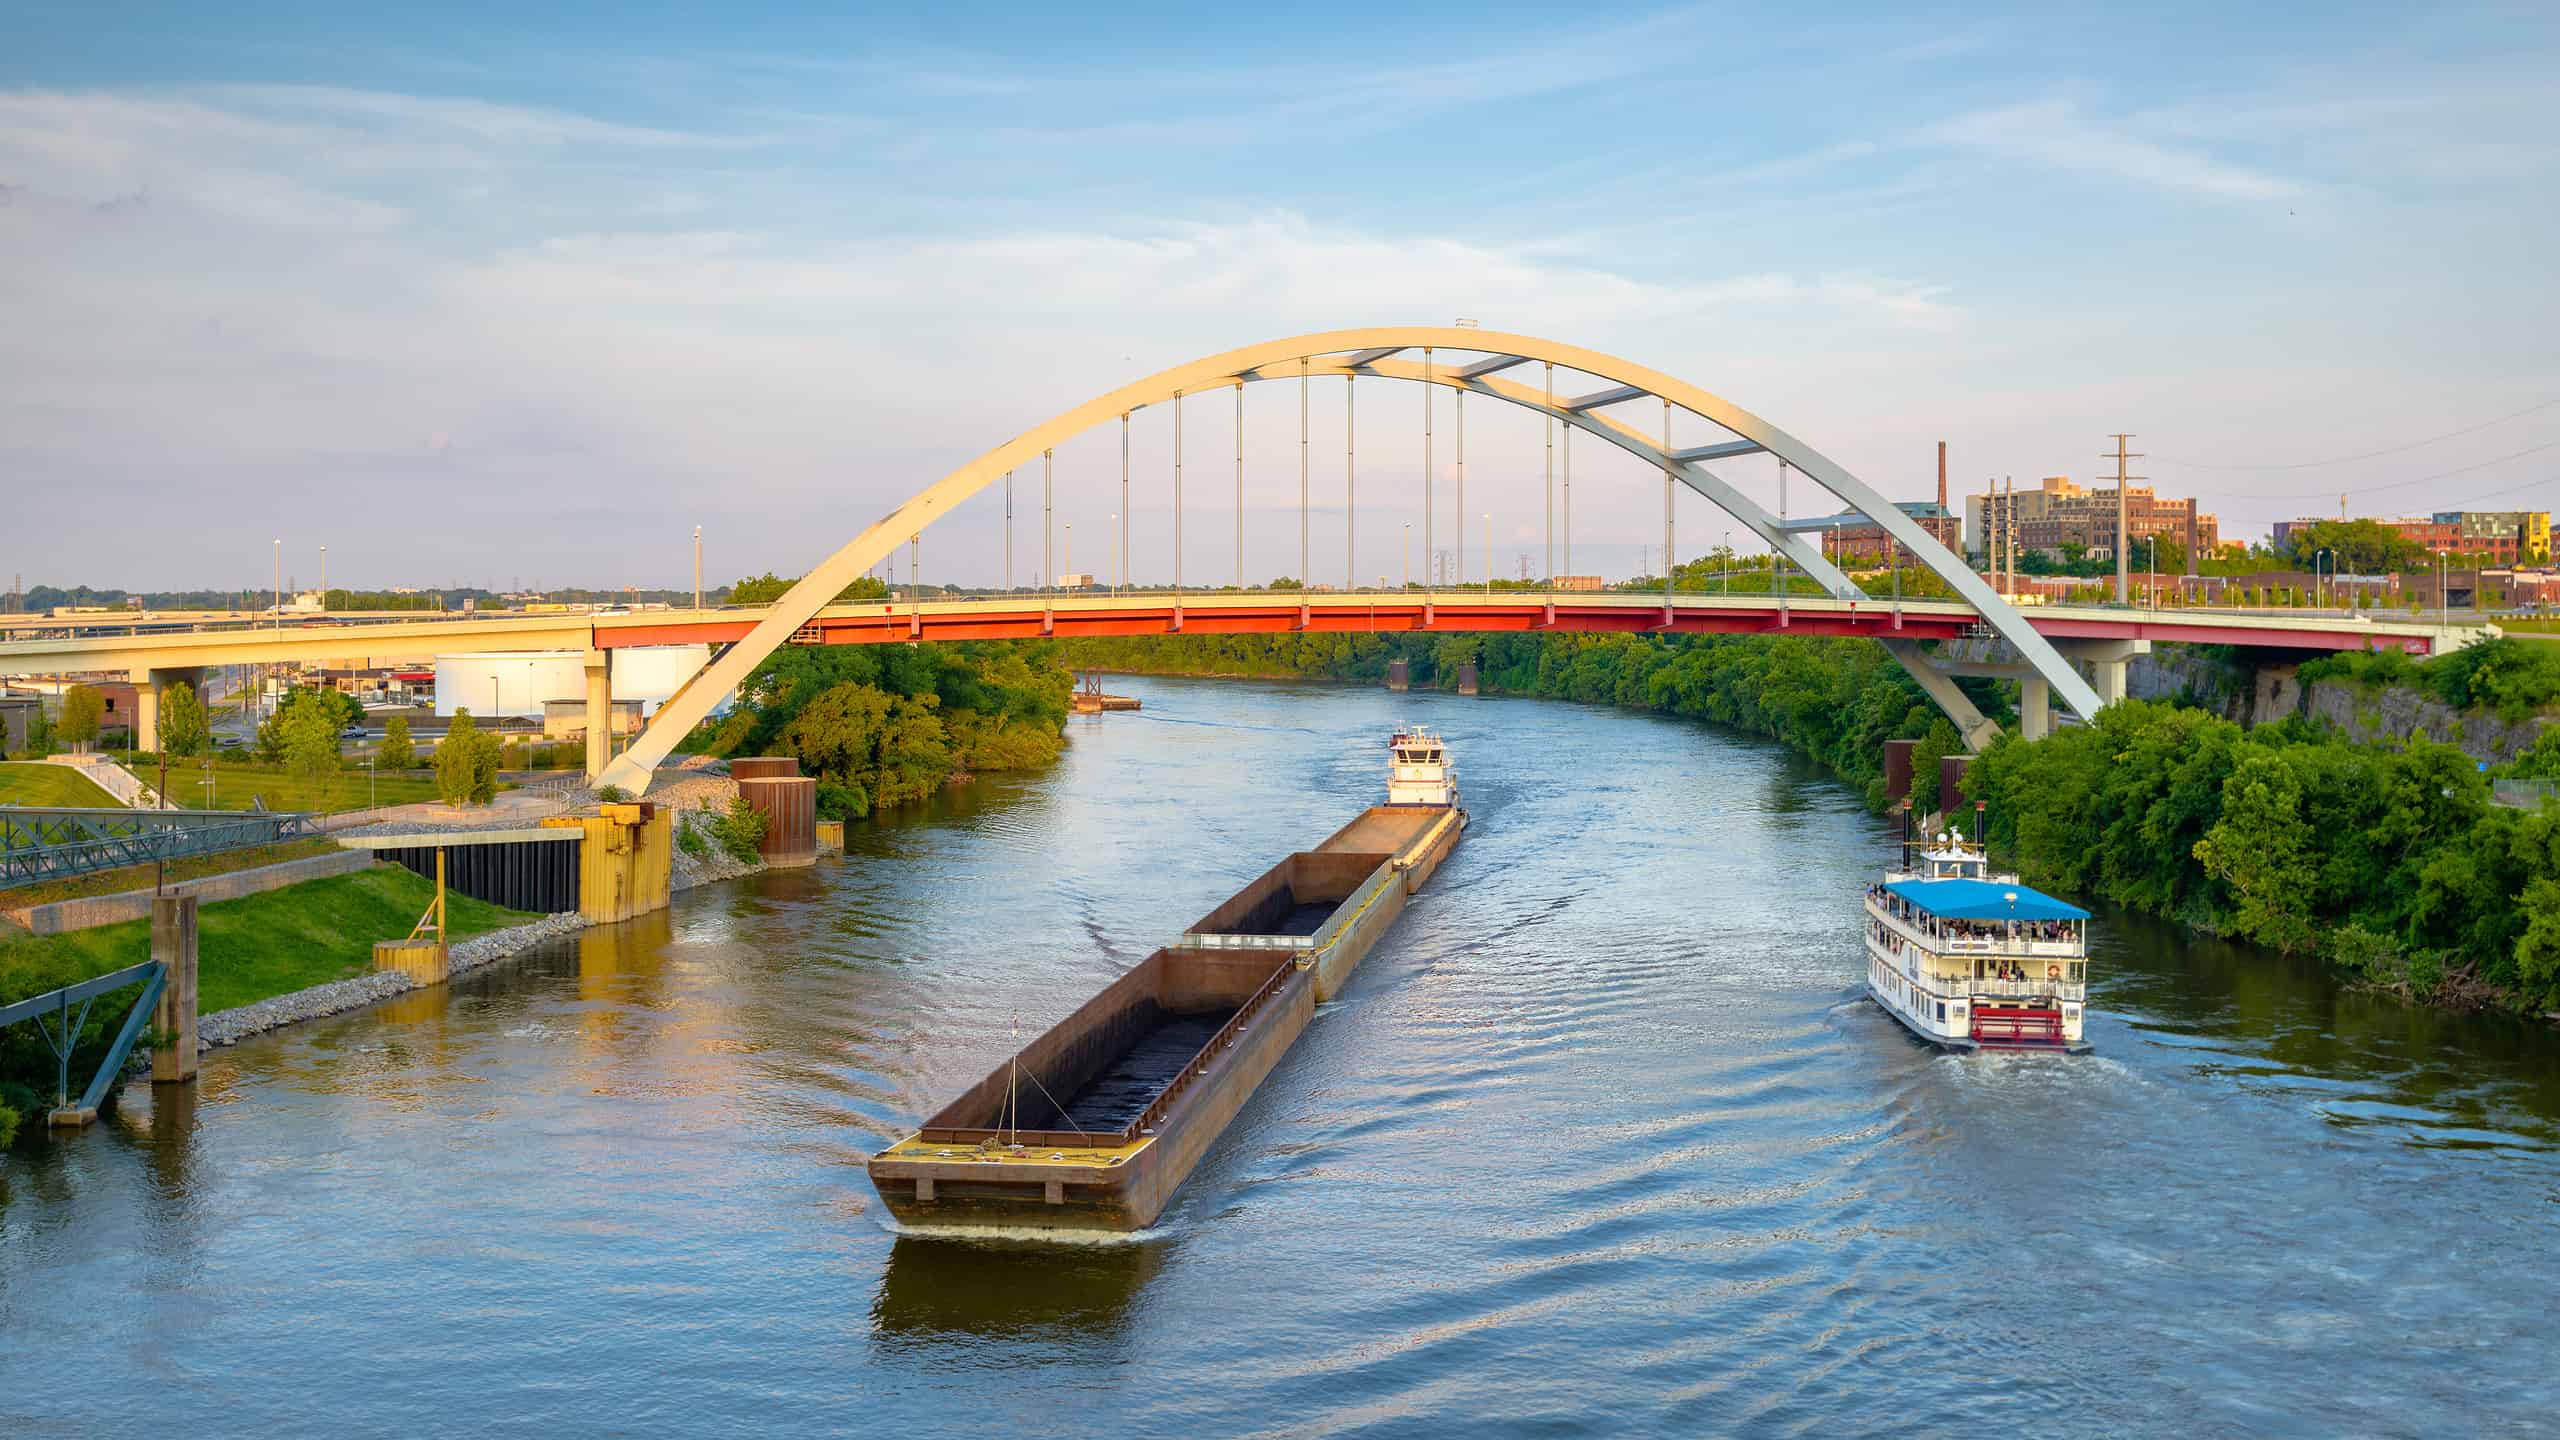 Bridges and Boats on the Cumberland River from Nashville, Tennessee, USA.